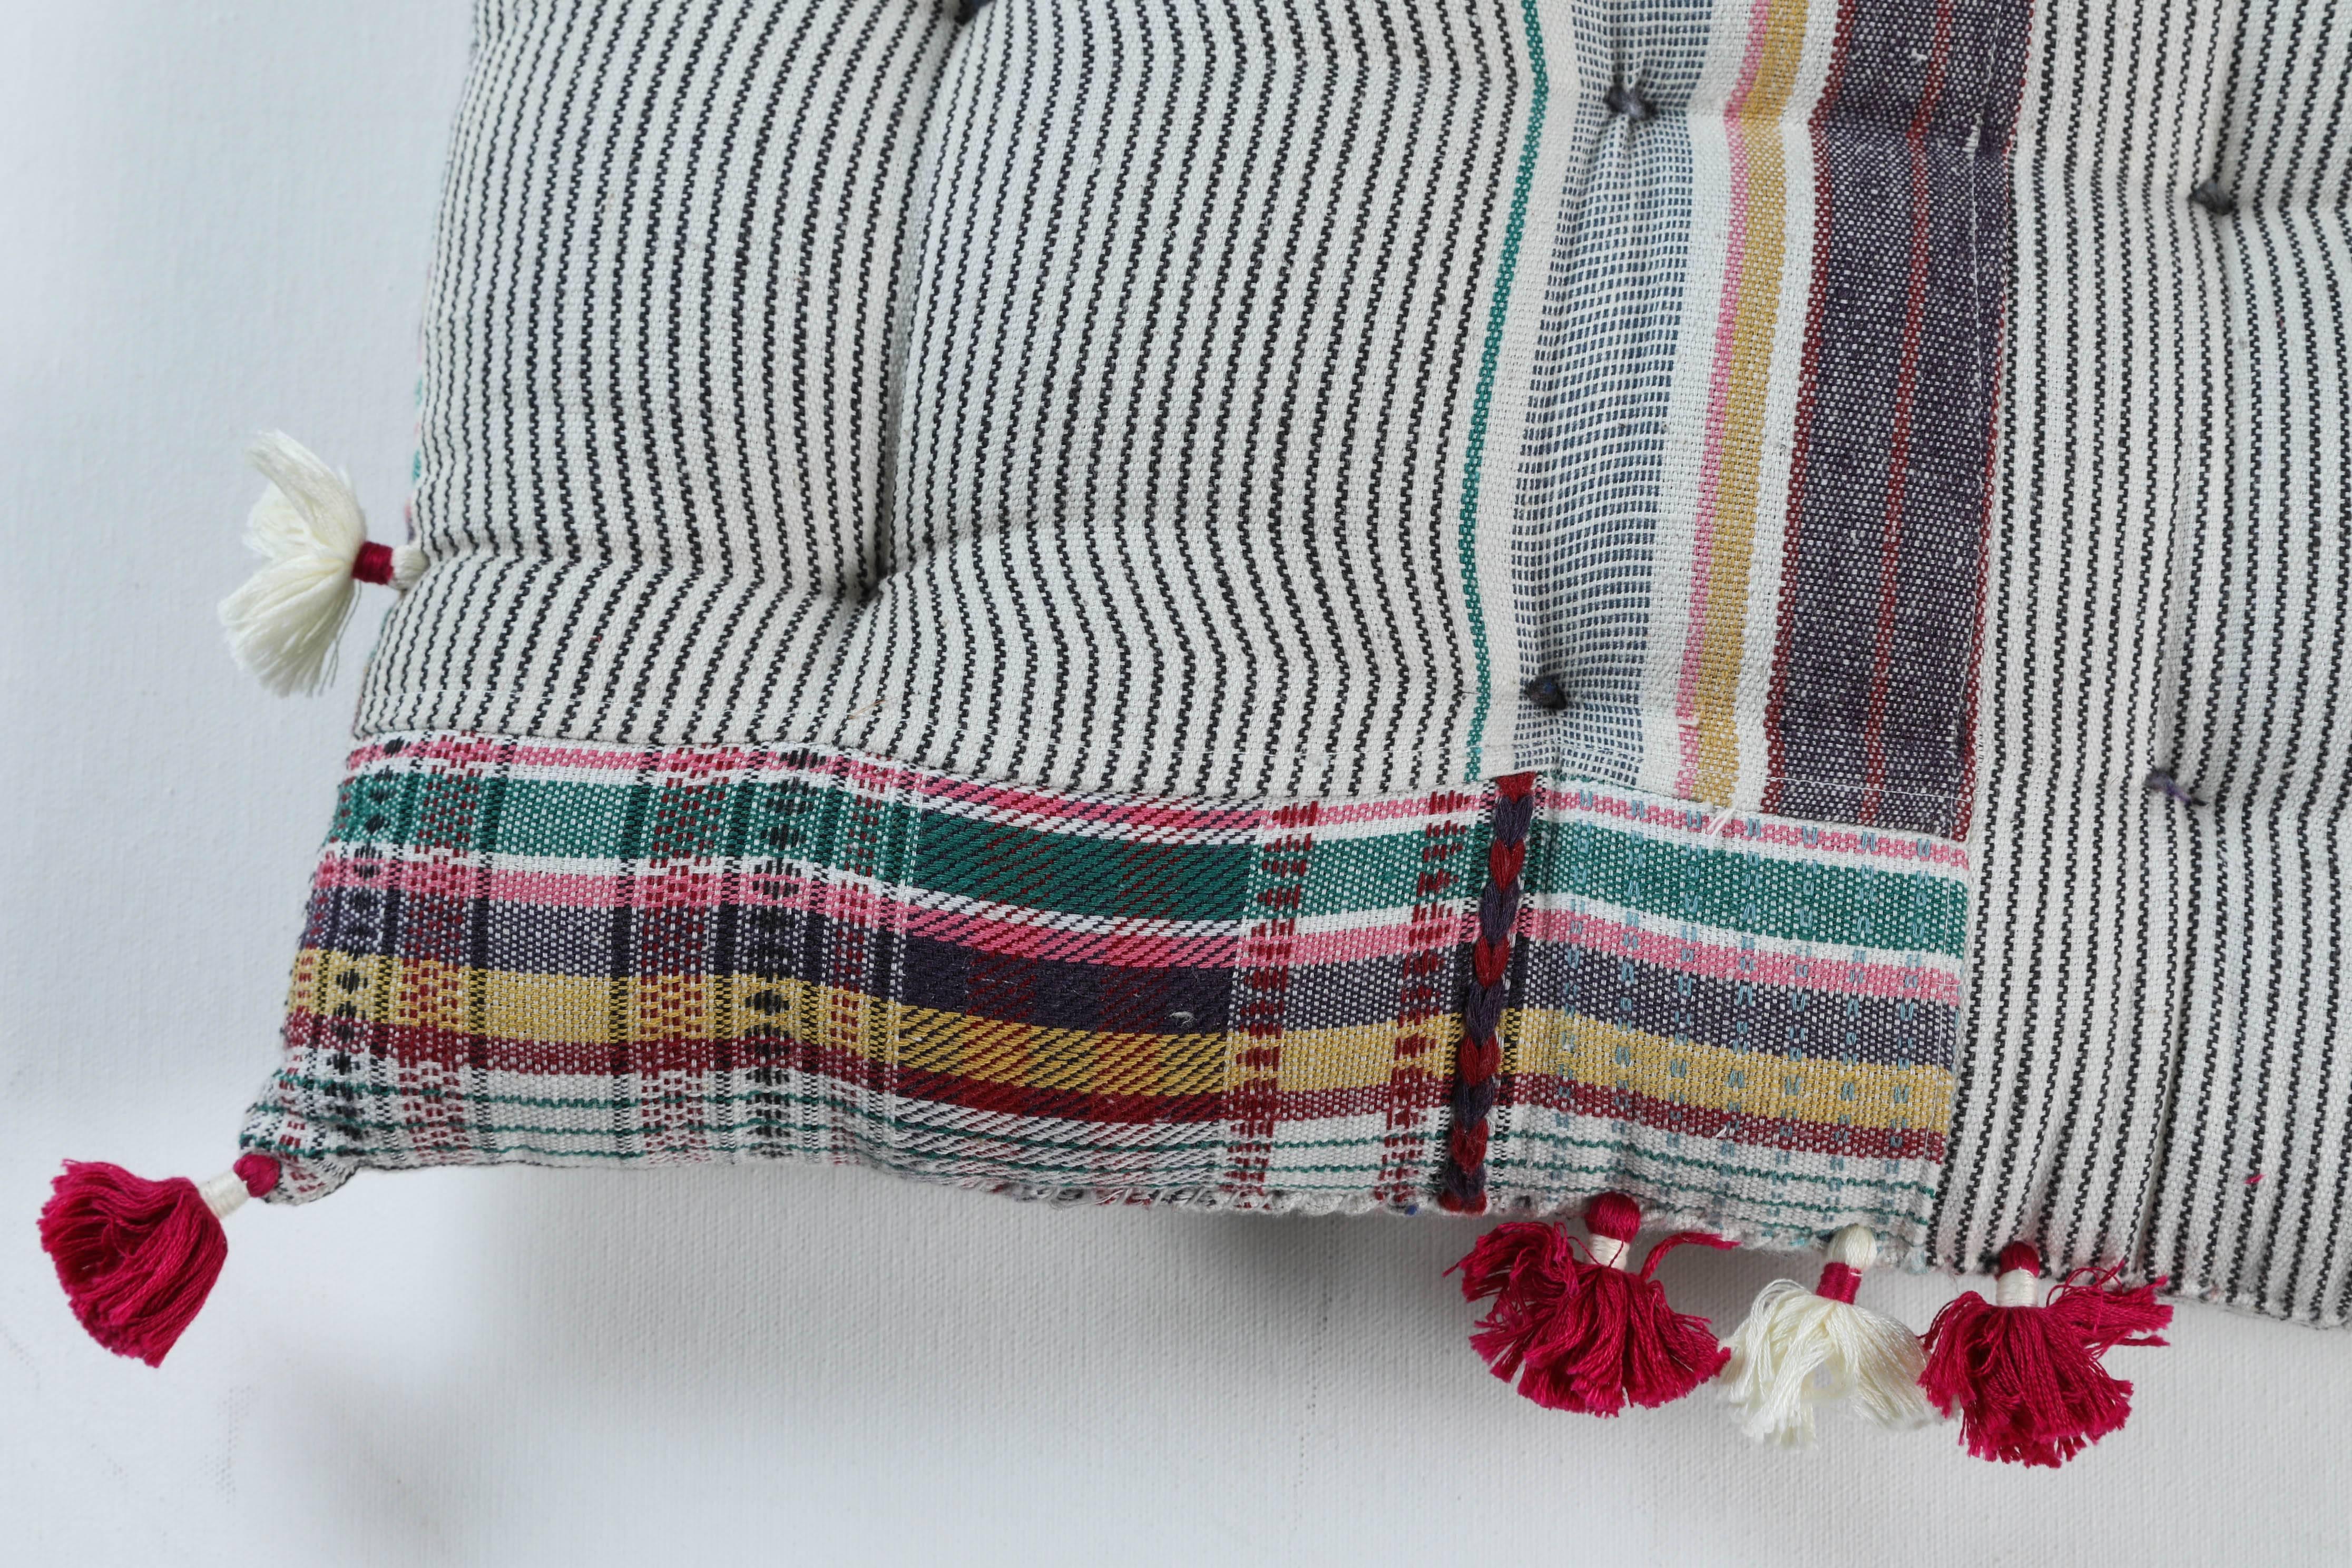 Kala naturally dyed organic cotton from Gujarat, India. Hand loomed using traditional Indian textile techniques to produce extra weft woven stripes and plaids. This multicolor striped pillow has added hand-knotted royal tassels.